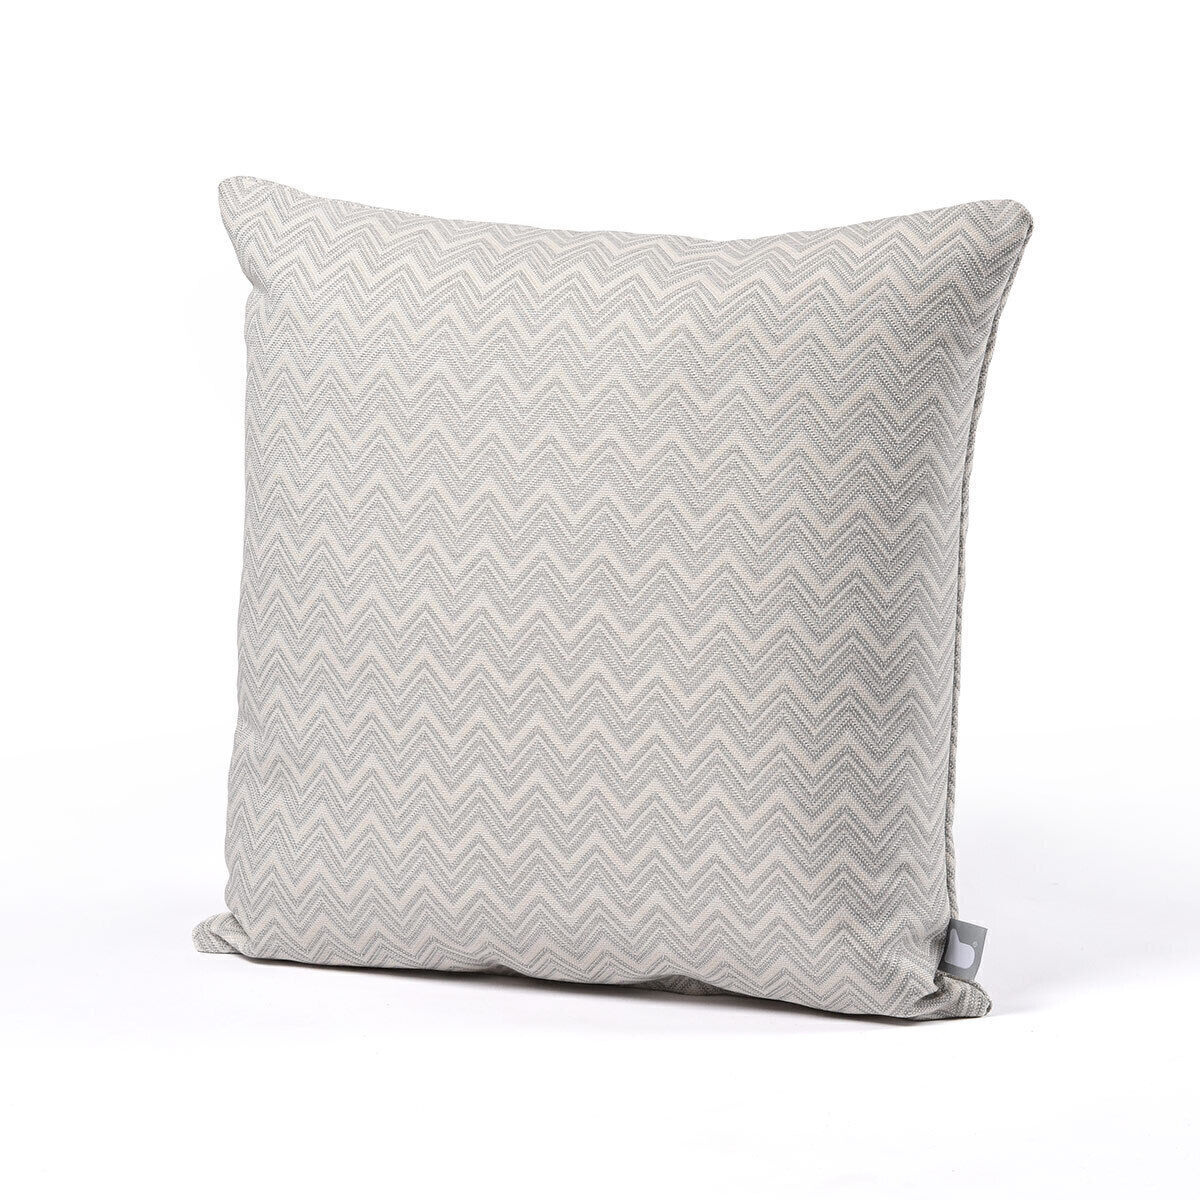 Maze - Pair of Outdoor Scatter Cushion (50x50cm) - Polines Grey product image